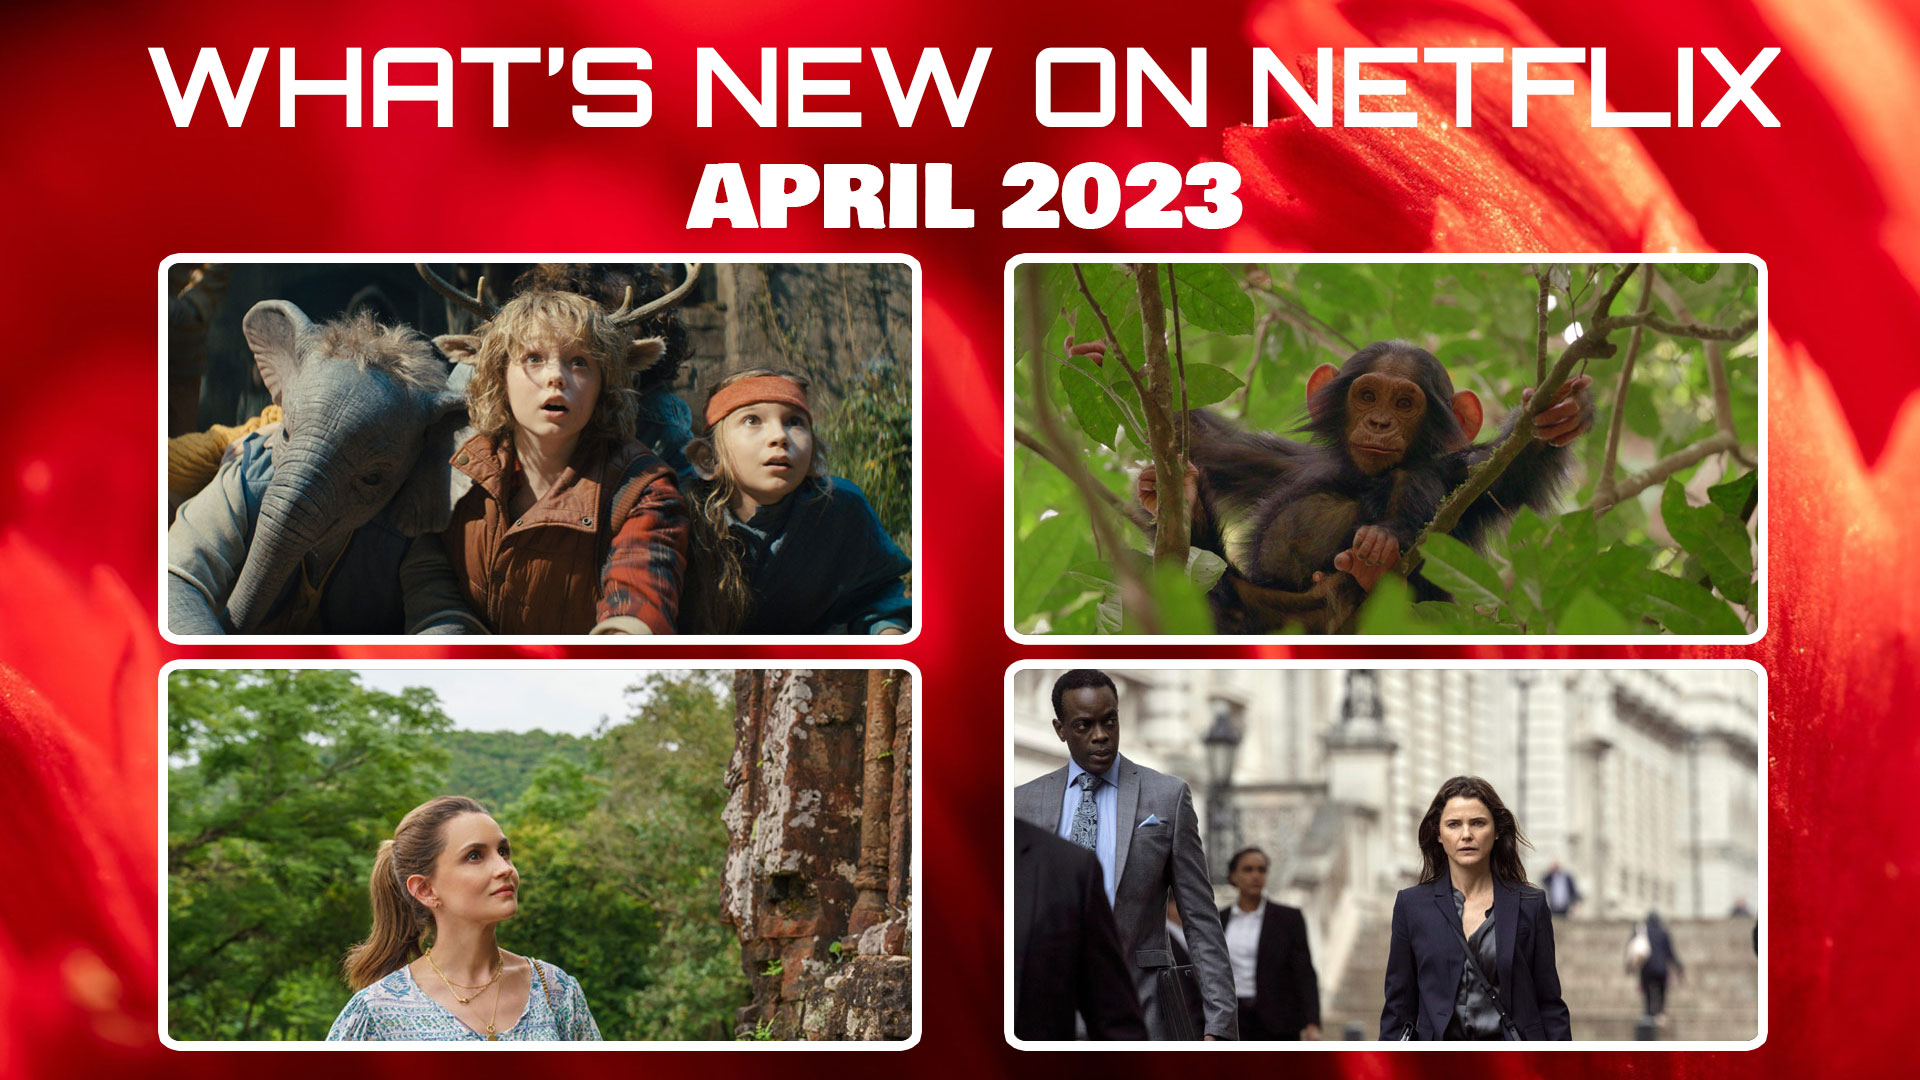 What's new on Netflix April 2023